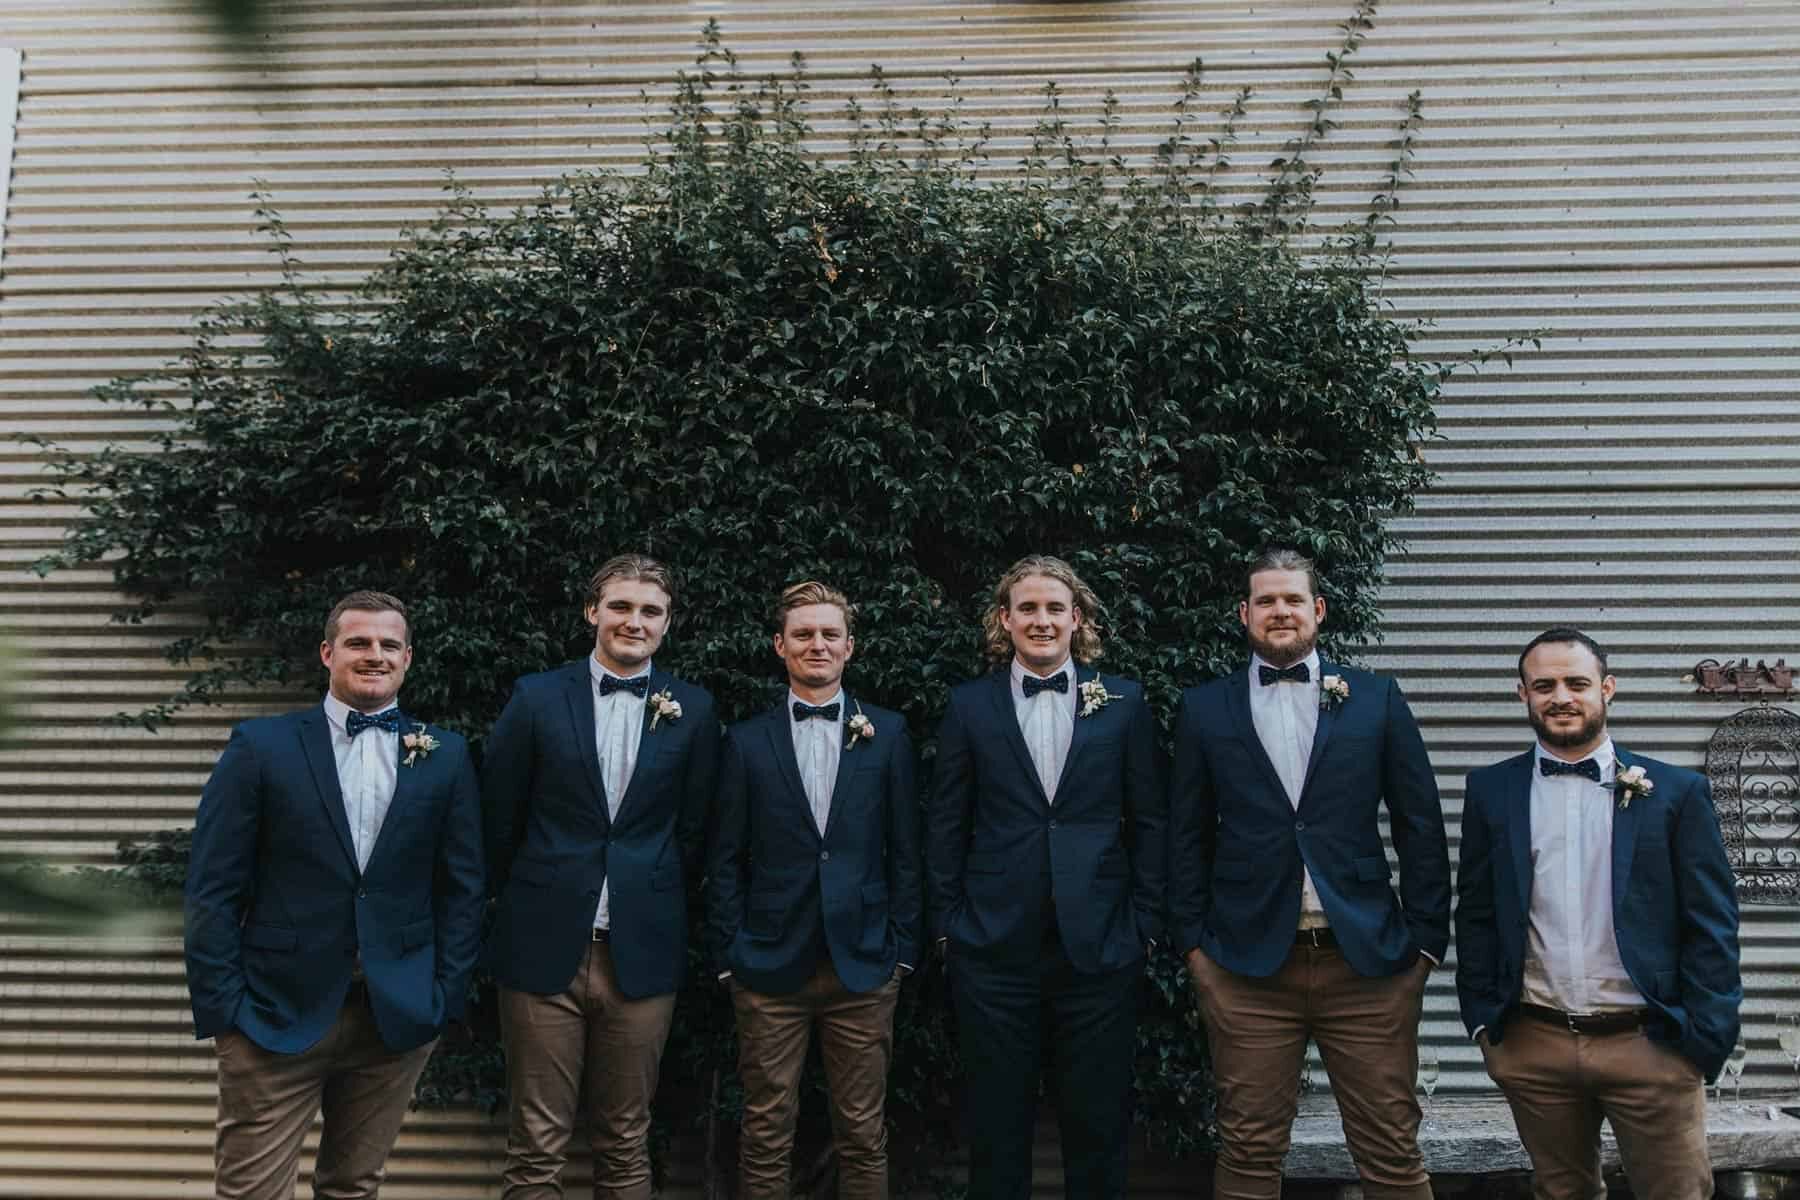 groomsmen in navy jackets and tan chinos